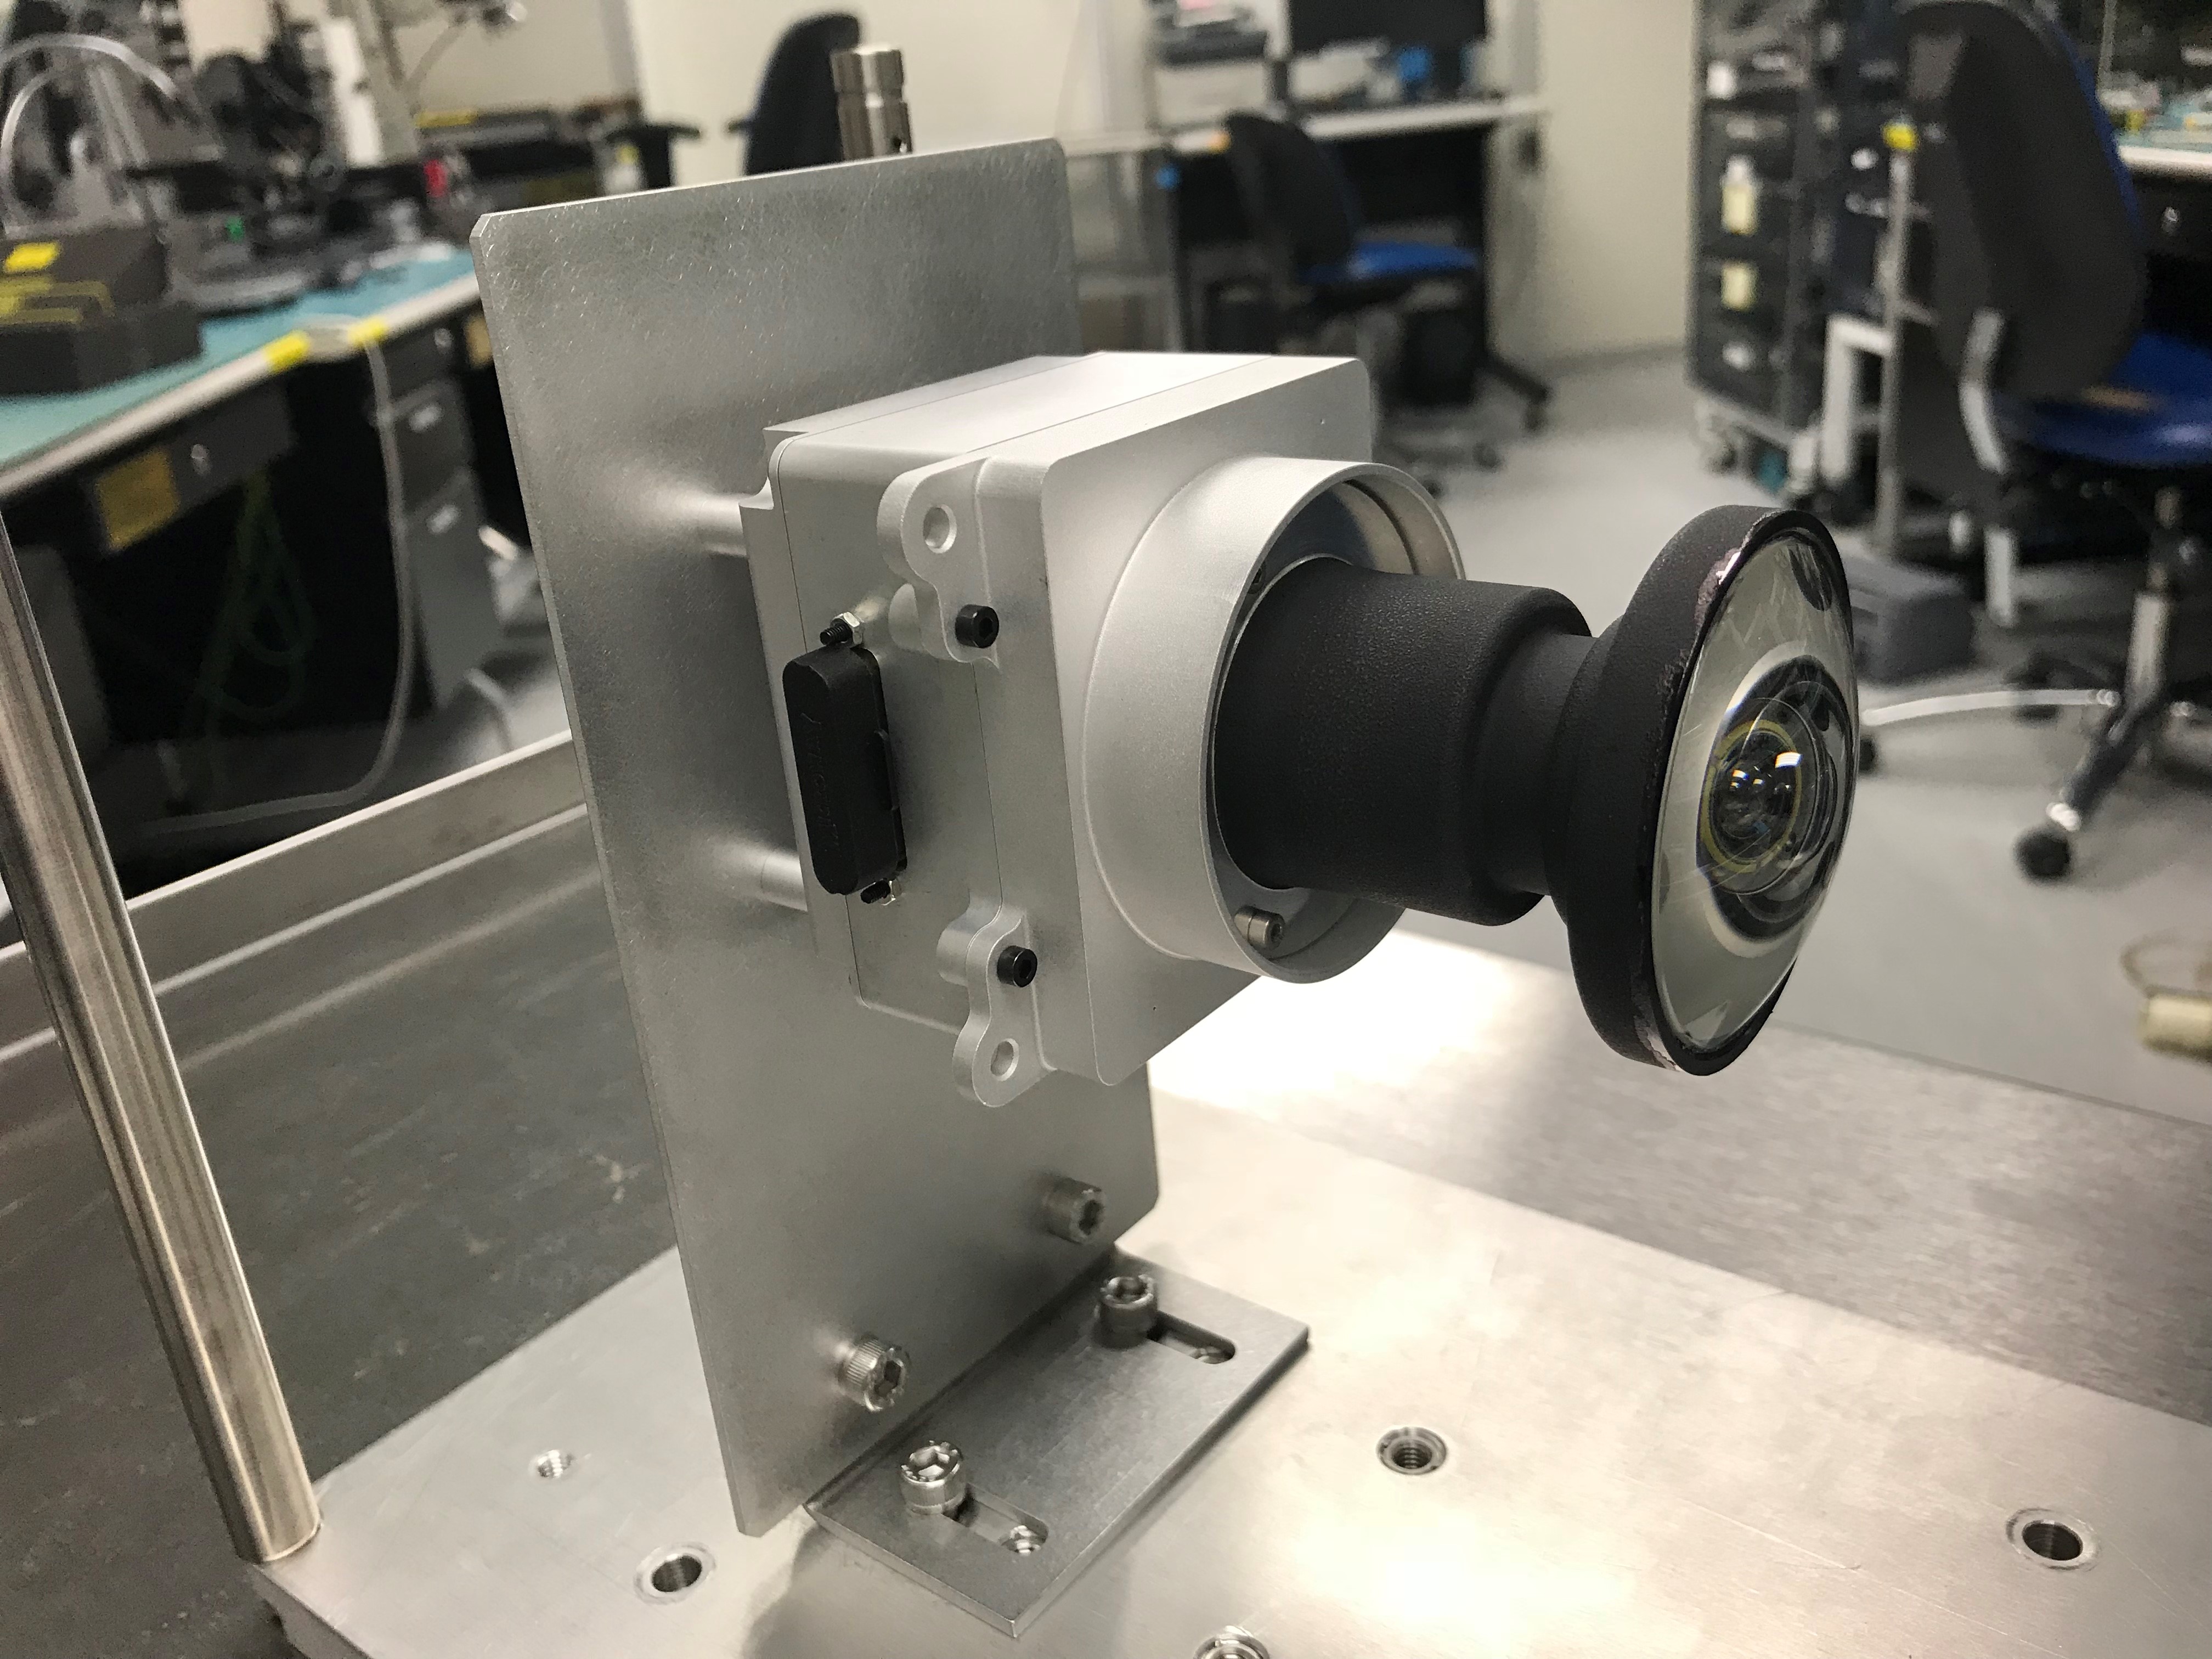 One of the enhanced engineering cameras with a prototype lens for the Hazcams, which will watch for obstacles encountered by the Mars 2020 rover.